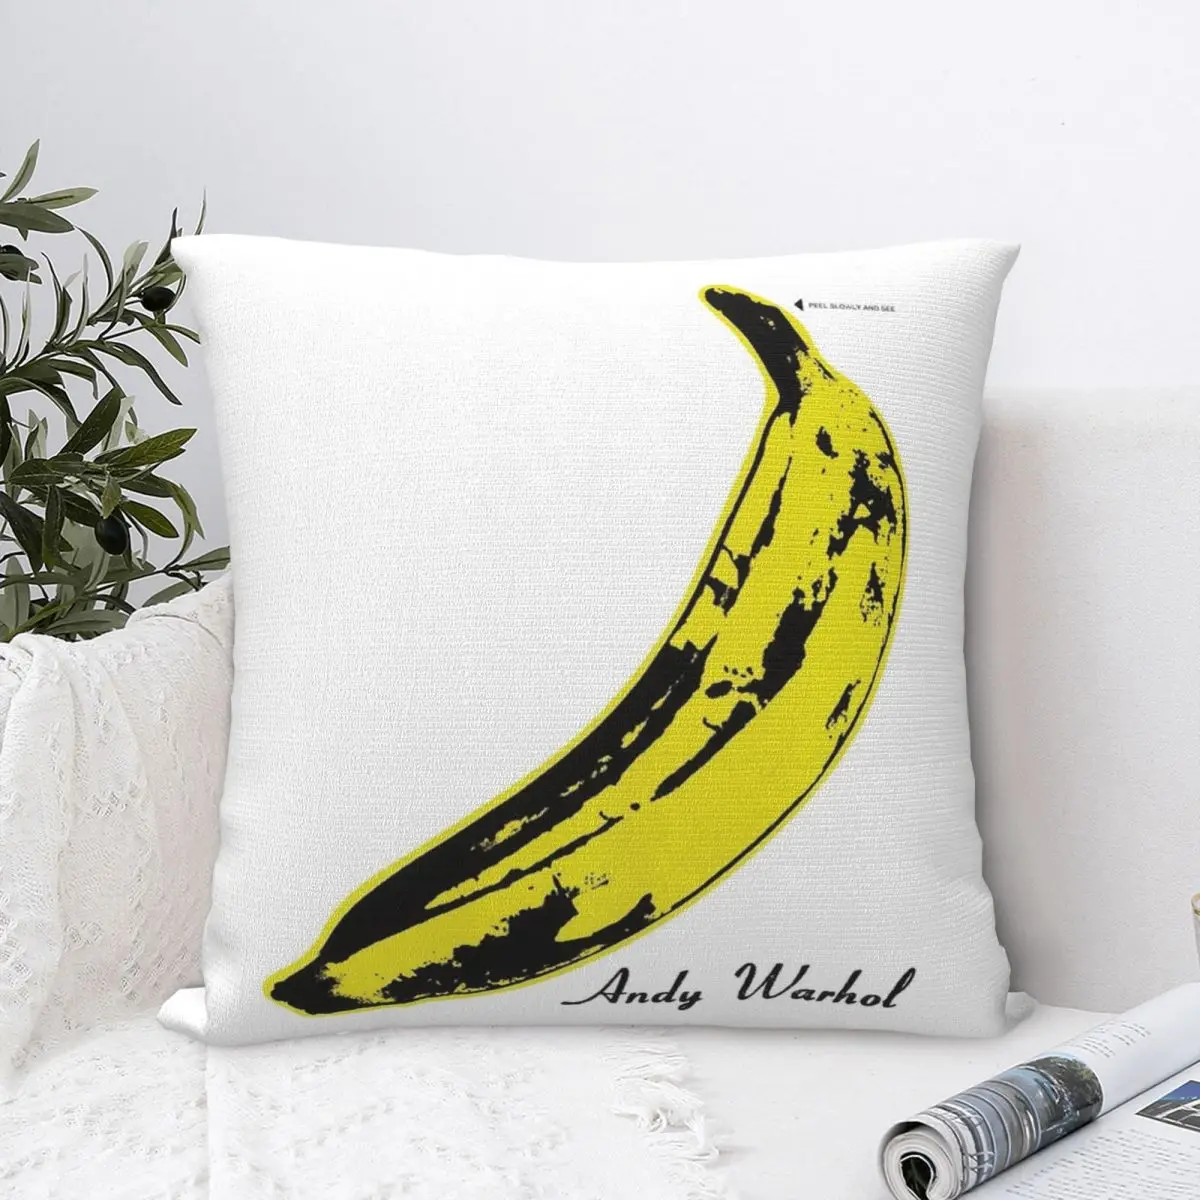 

Andy Warhol Banana Velvet Underground Square Pillowcase Cushion Cover Comfort Pillow Case Polyester Throw Pillow cover For Home